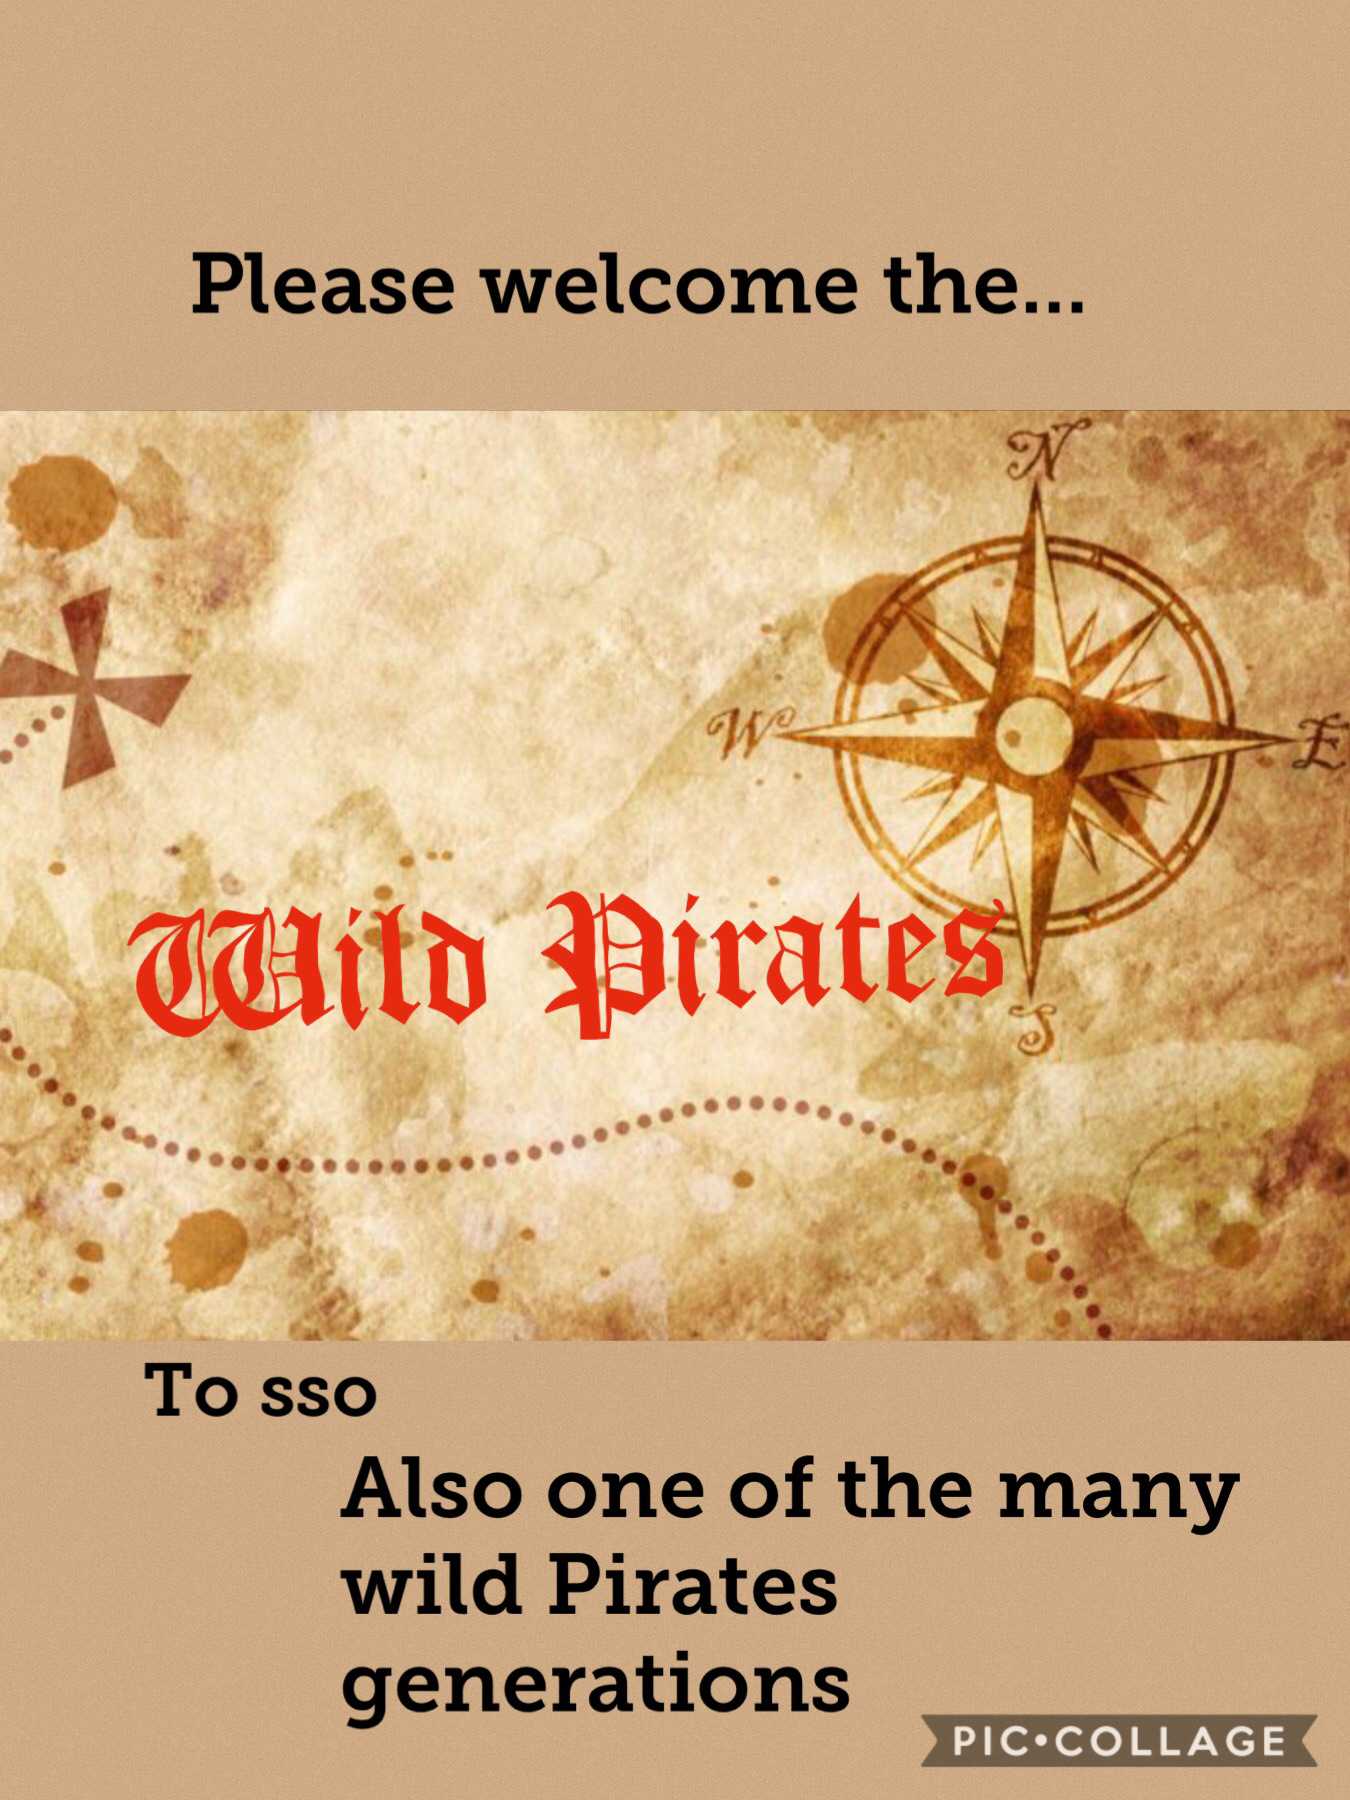 Please welcome the Wild Pirates to sso we are currently at 24 members if you would like to join you must be on the frost valley server